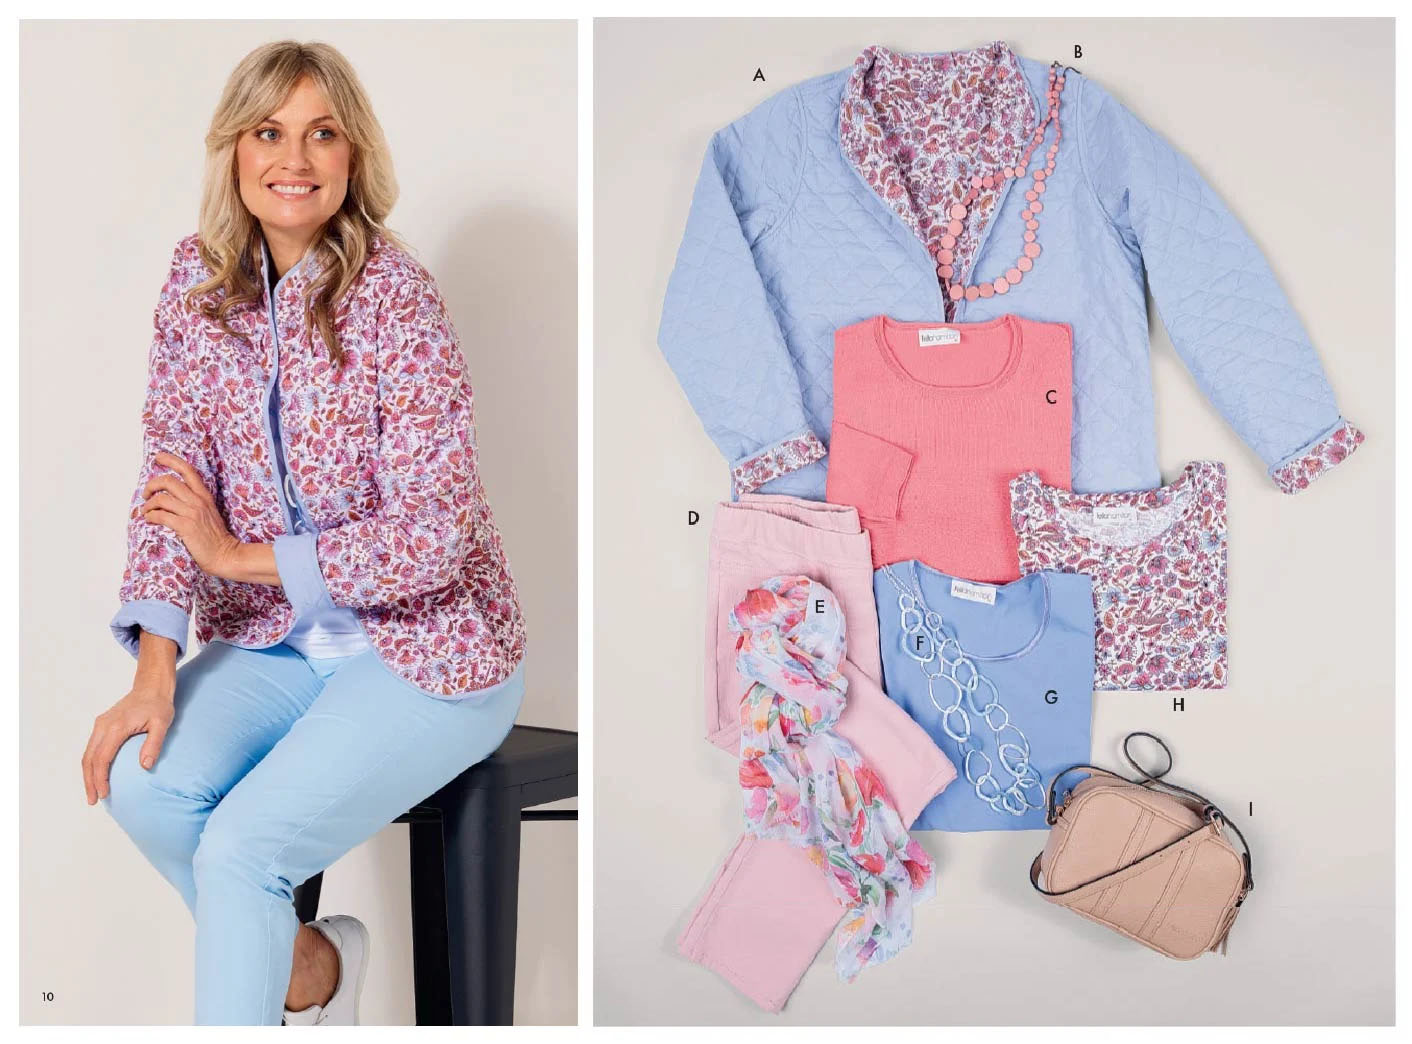 Catalogue image with Spring Bloom Jacket and Tee